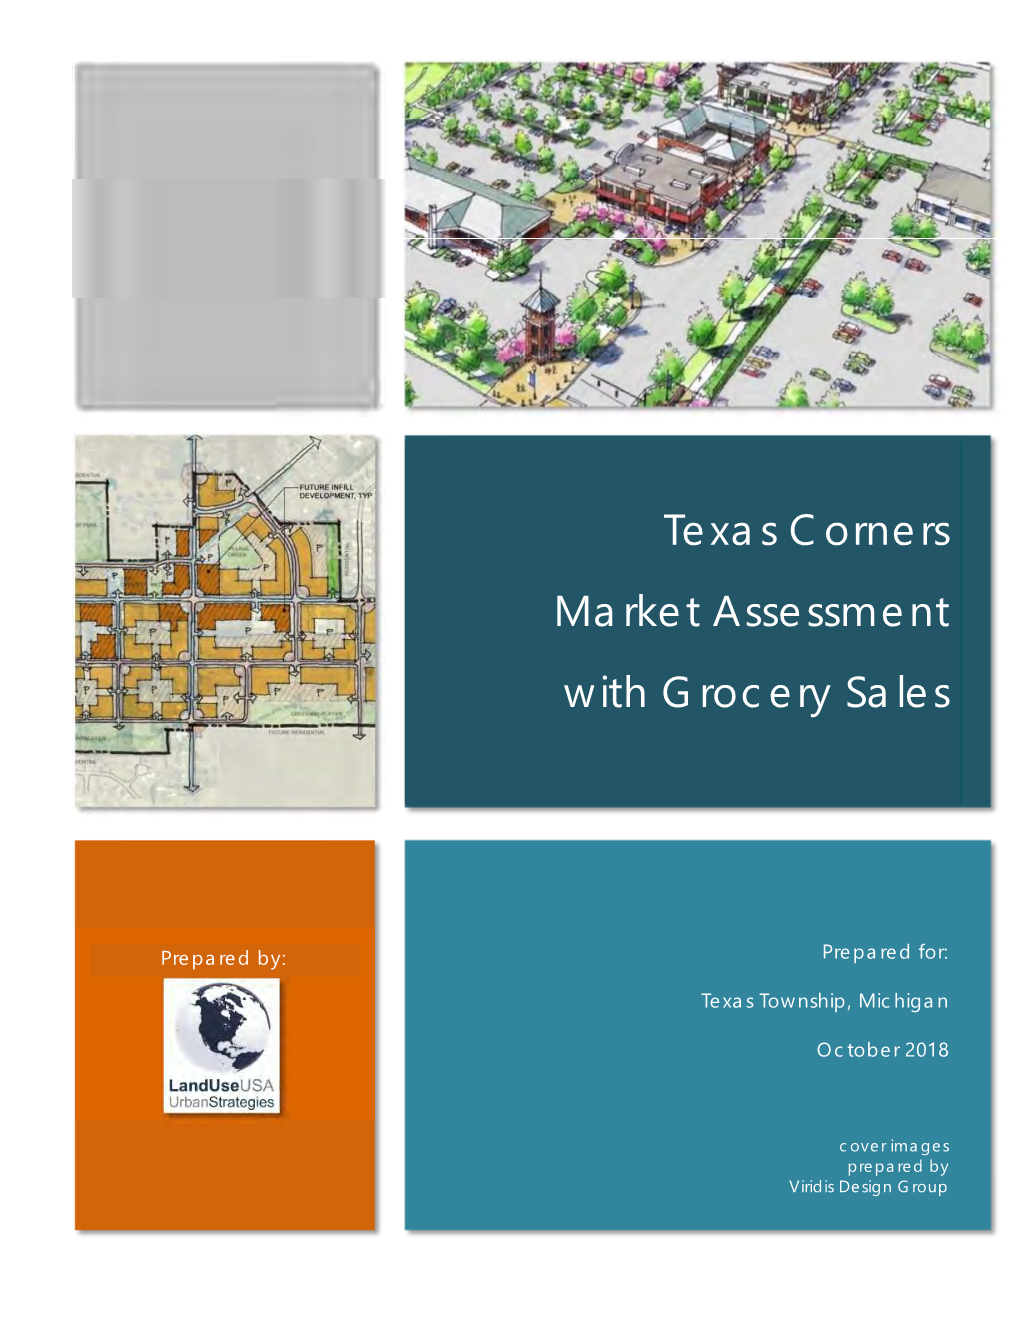 Texas Corners Market Assessment with Grocery Sales